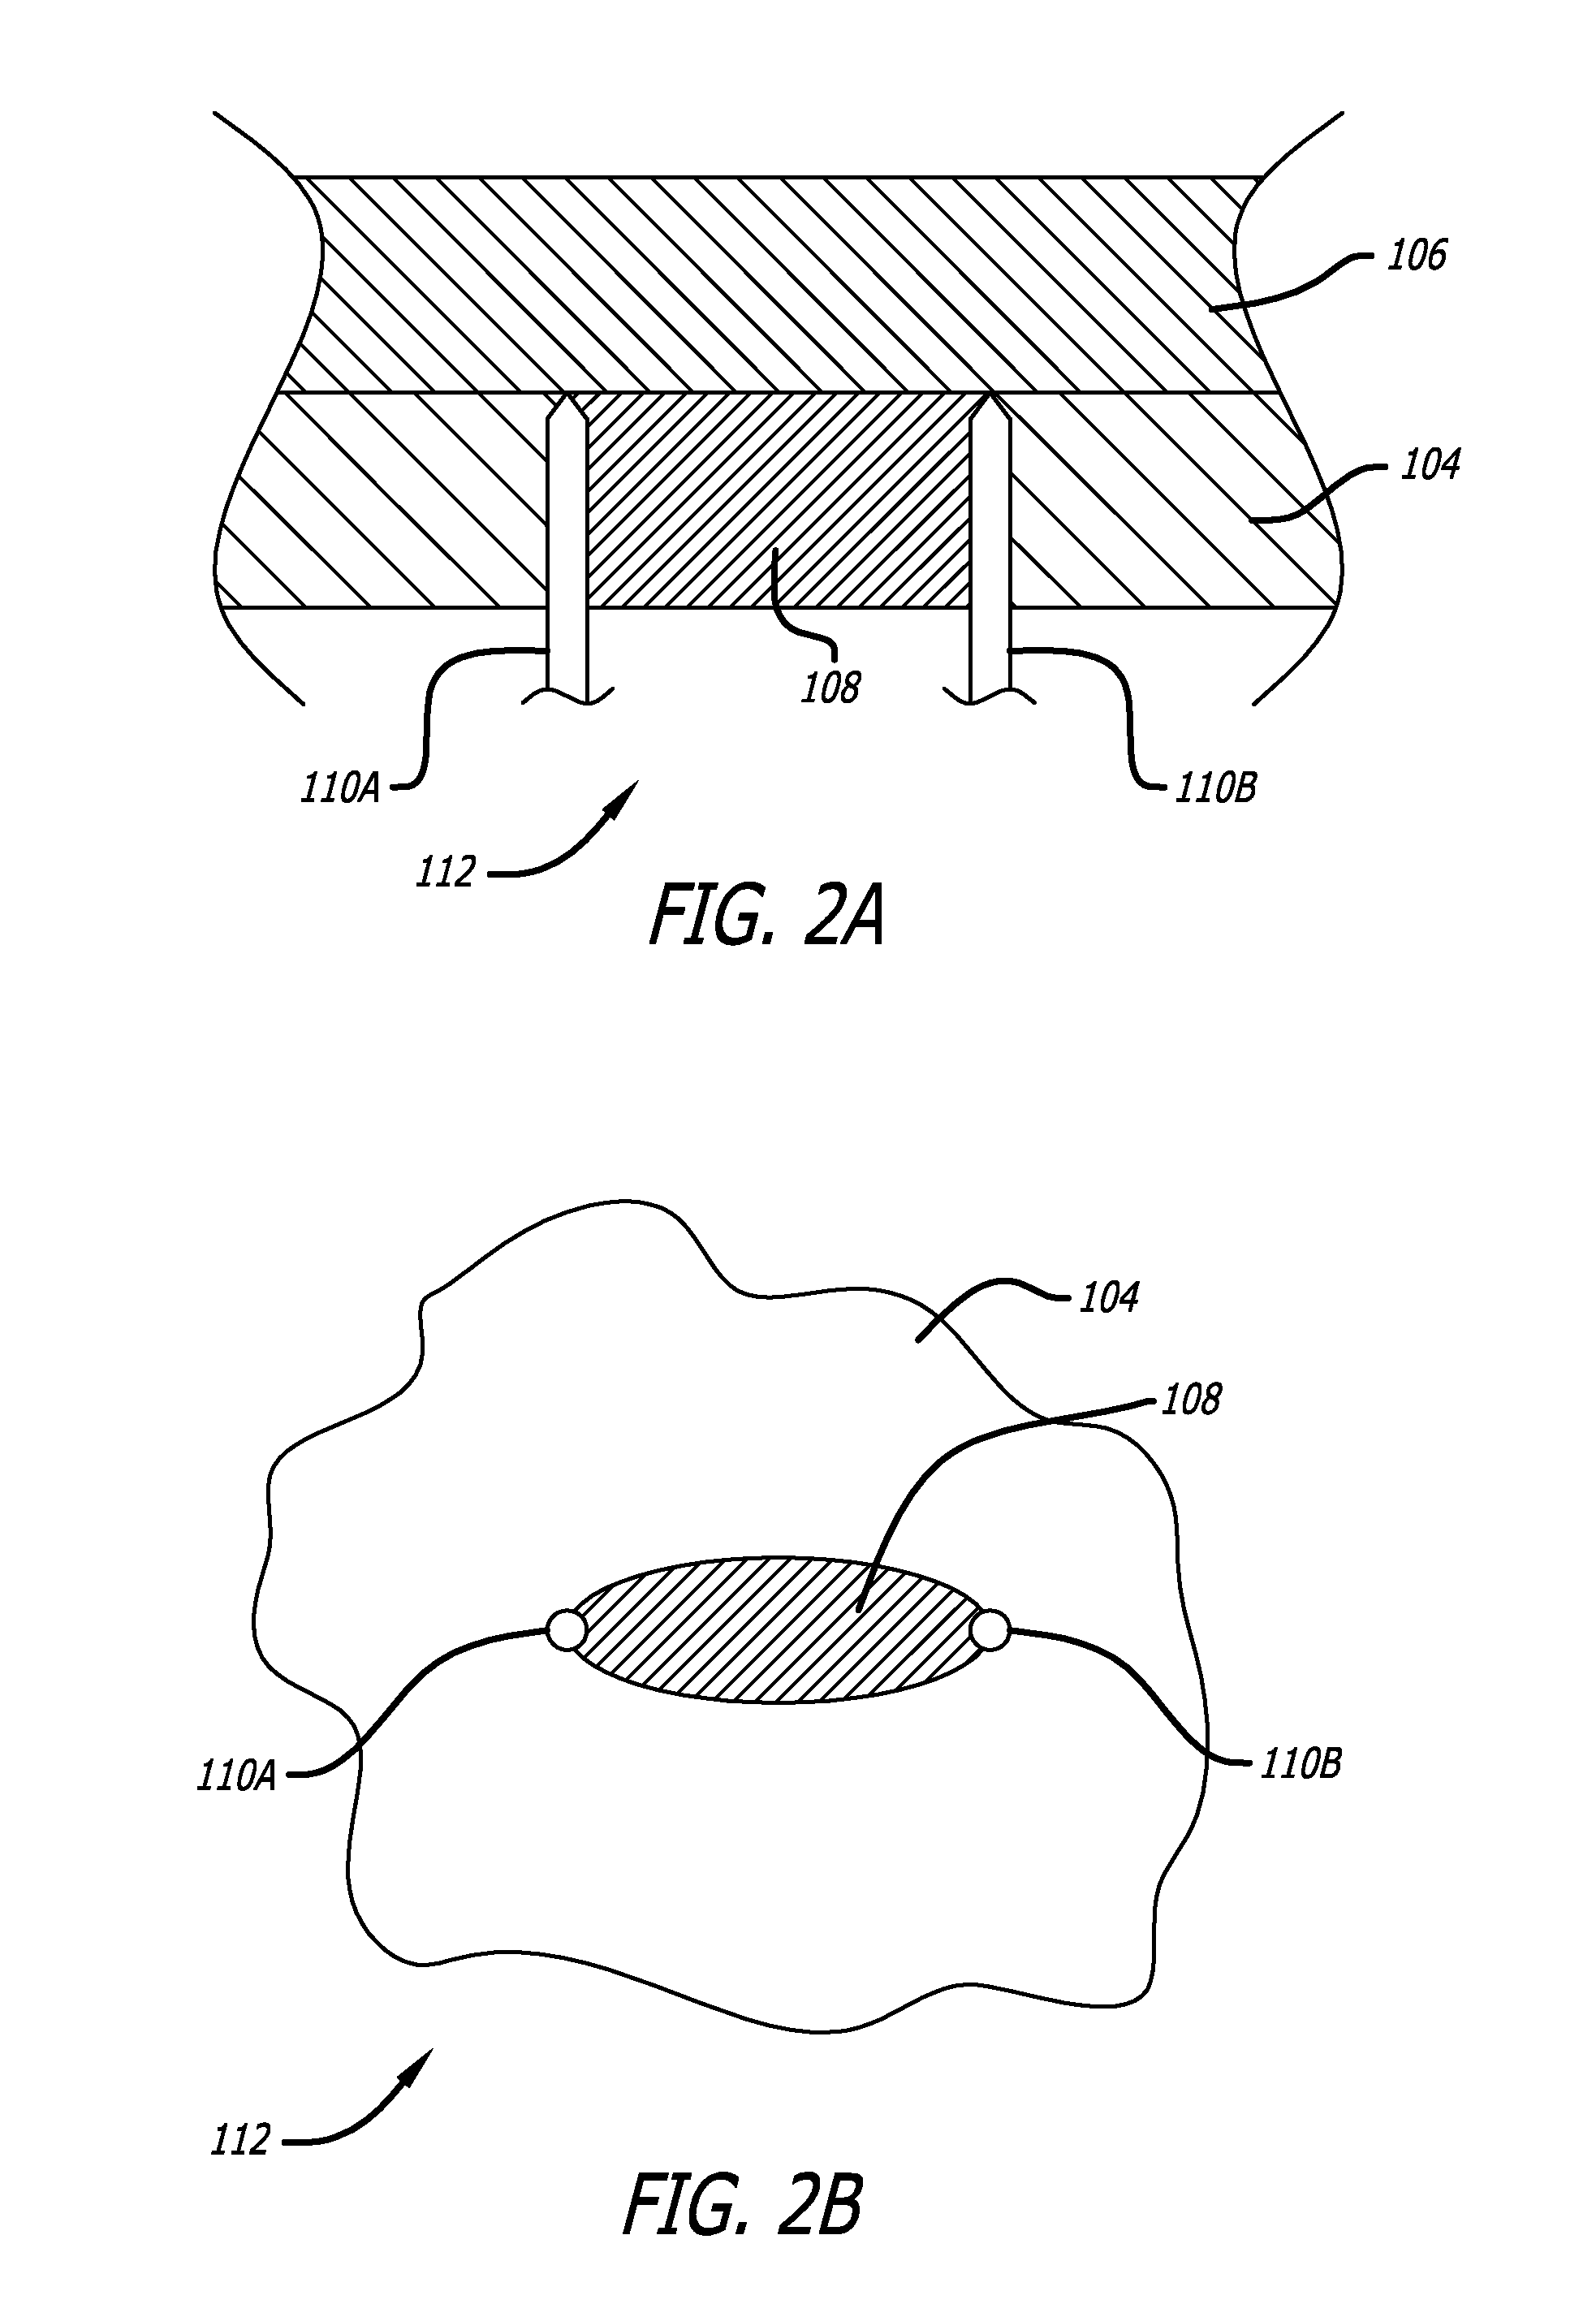 Methods and devices for creating electrical block at specific sites in cardiac tissue with targeted tissue ablation